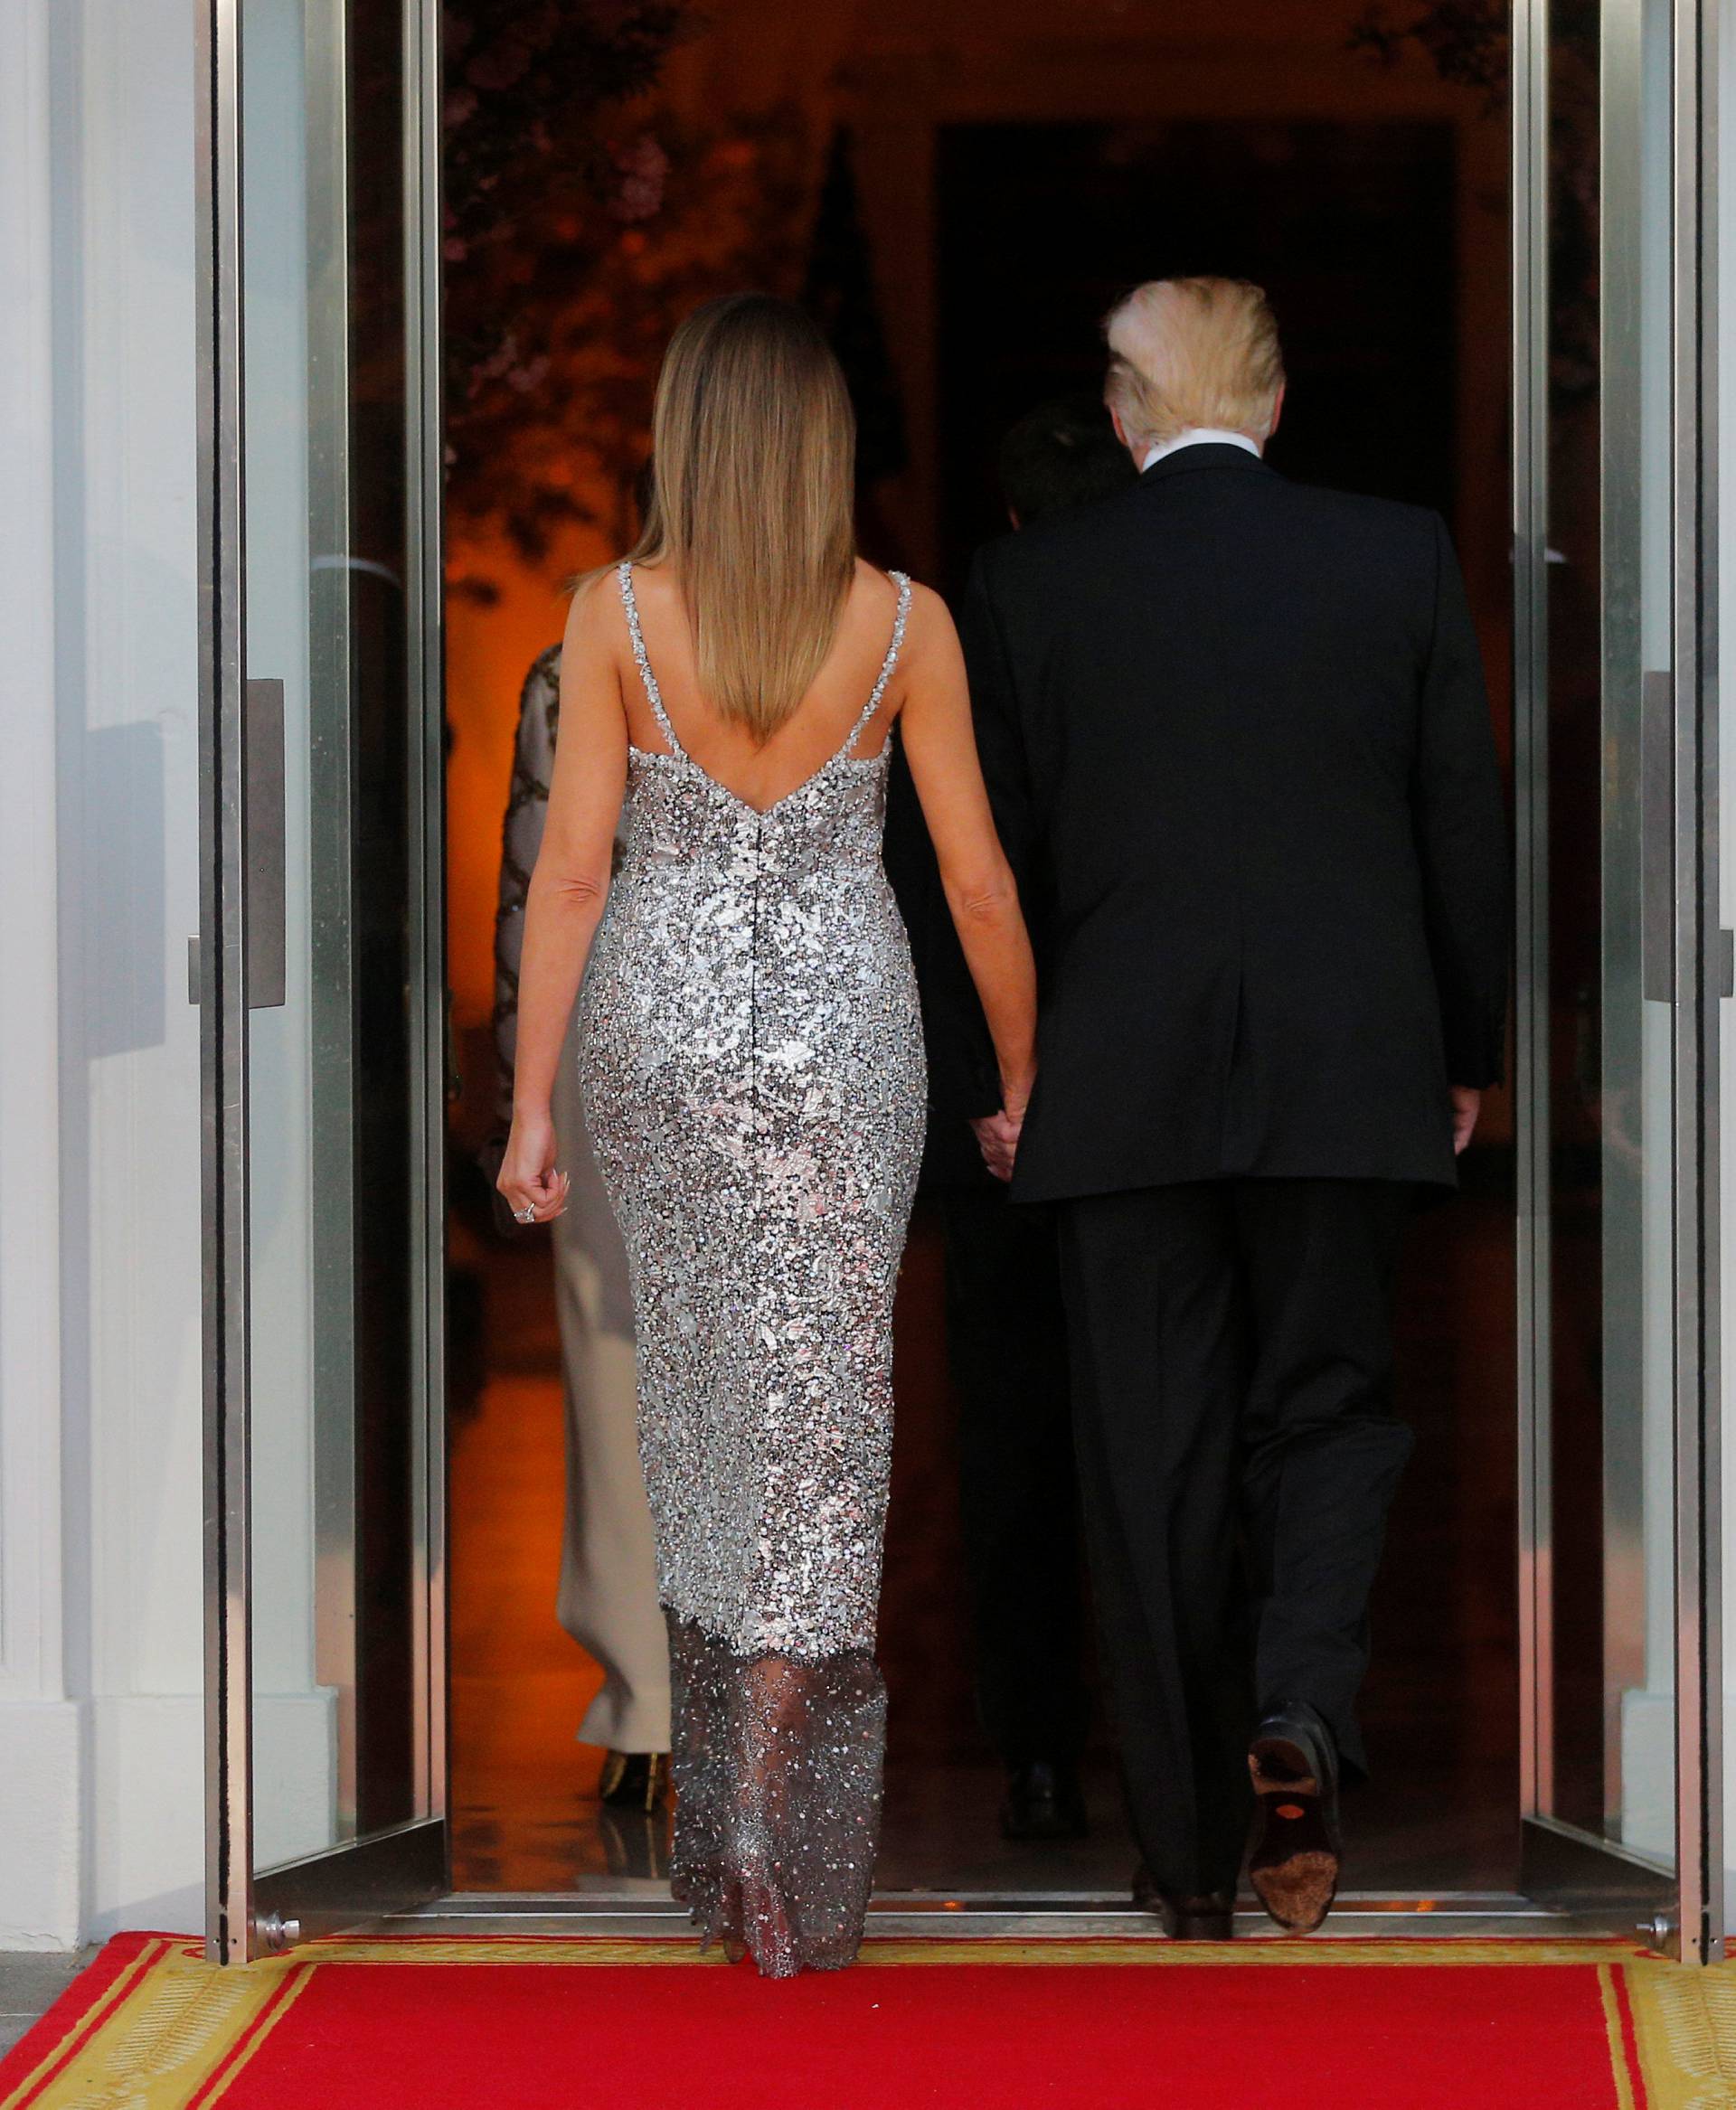 U.S. President Trump and first lady Melania walk into the White House after welcoming French President Macron and his wife for a State Dinner in Washington